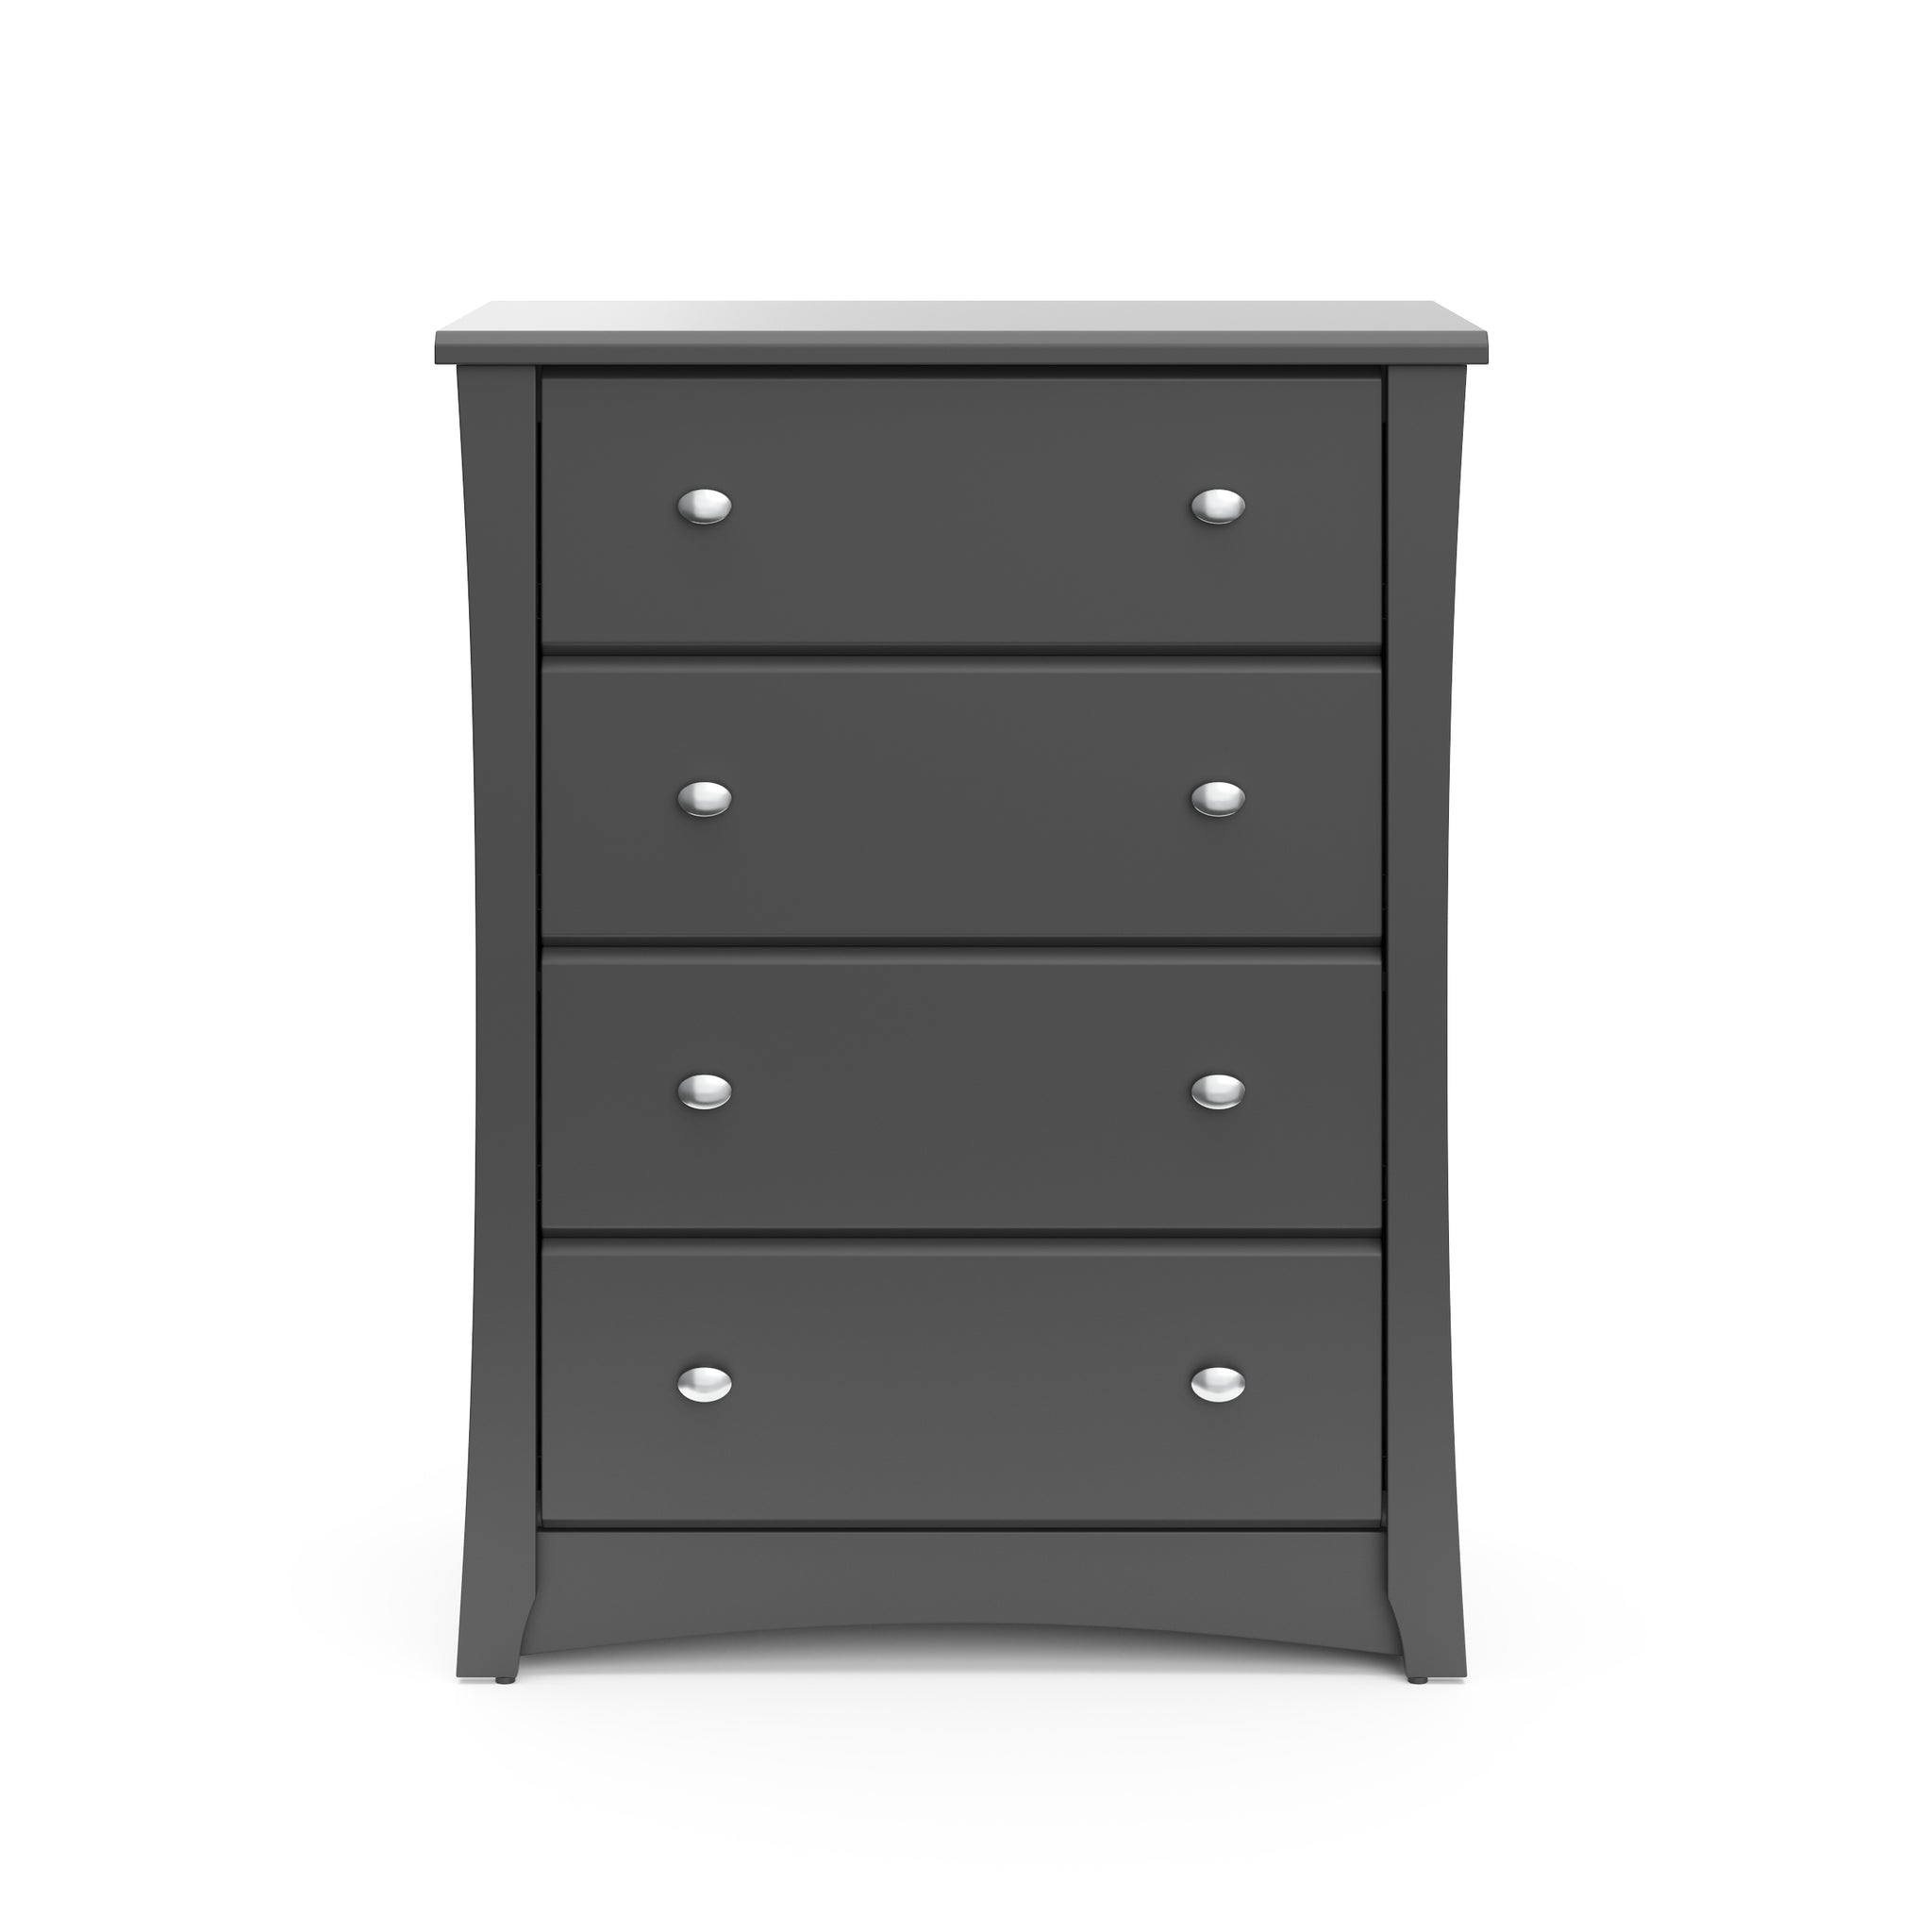 Front view of gray 4 drawer chest